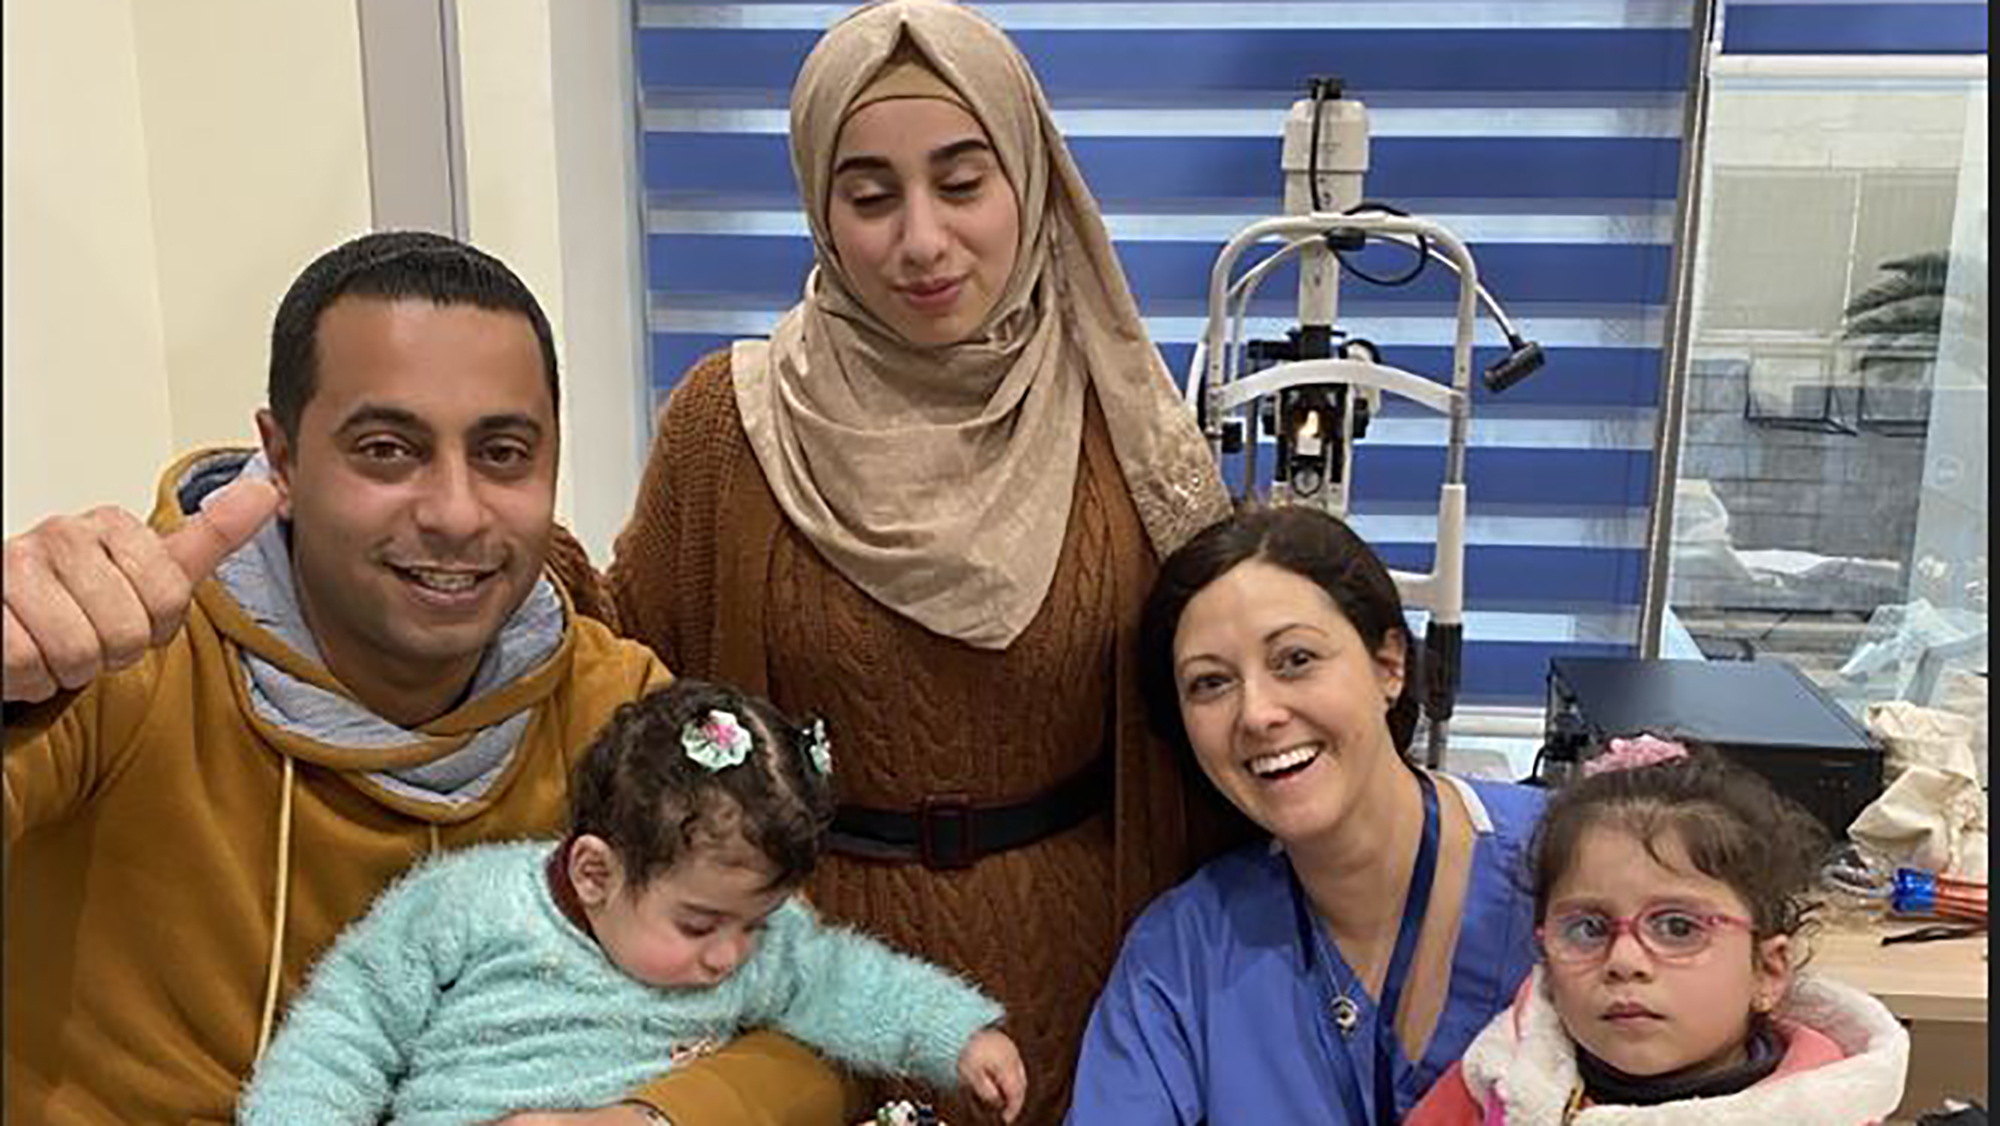 A Jordanian mother and father with their toddler and infant pose in an exam room with a GO-E clinician